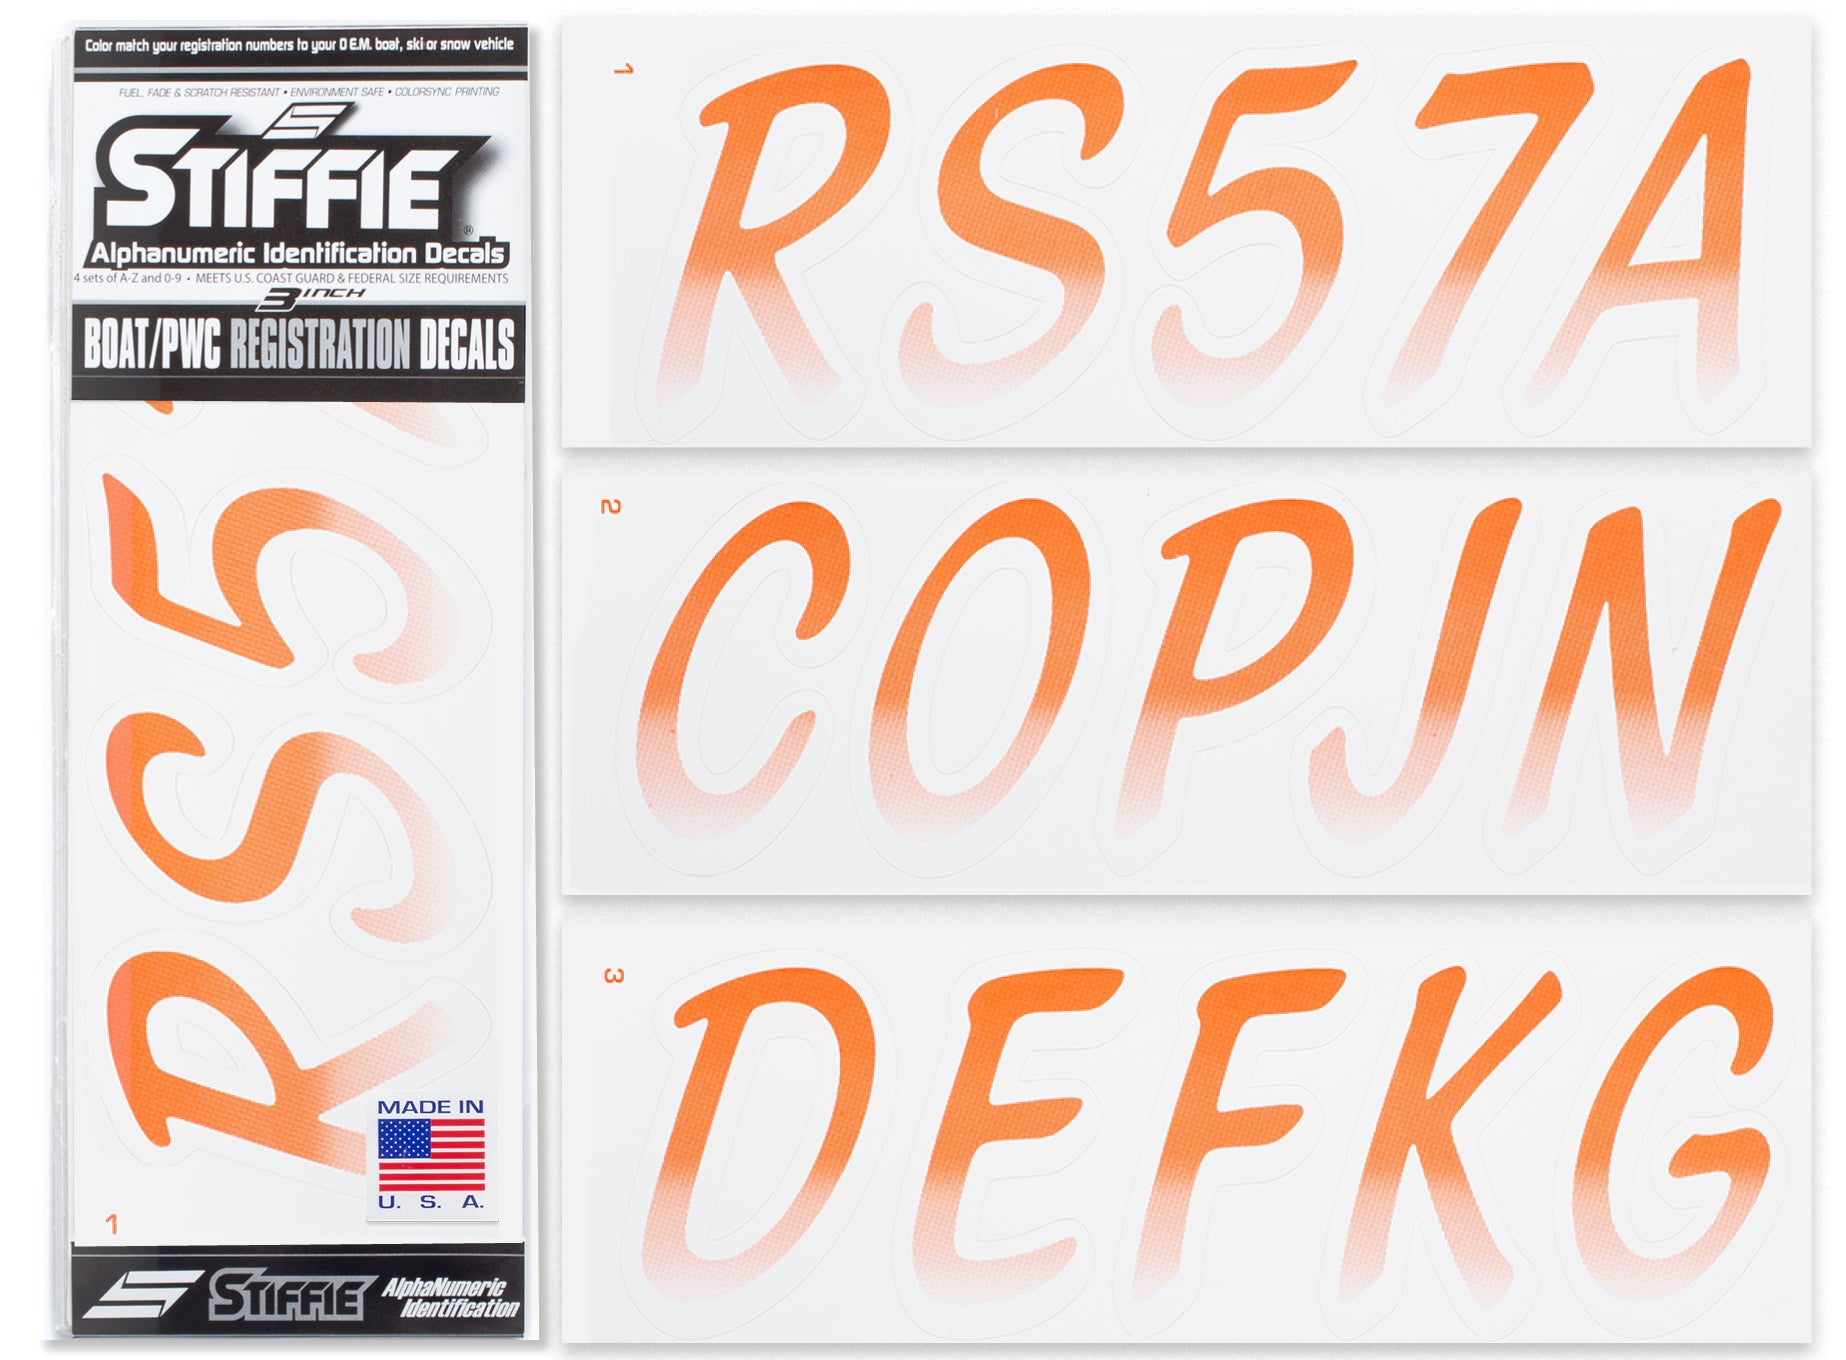 STIFFIE Whipline Orange/White 3" Alpha-Numeric Registration Identification Numbers Stickers Decals for Boats & Personal Watercraft